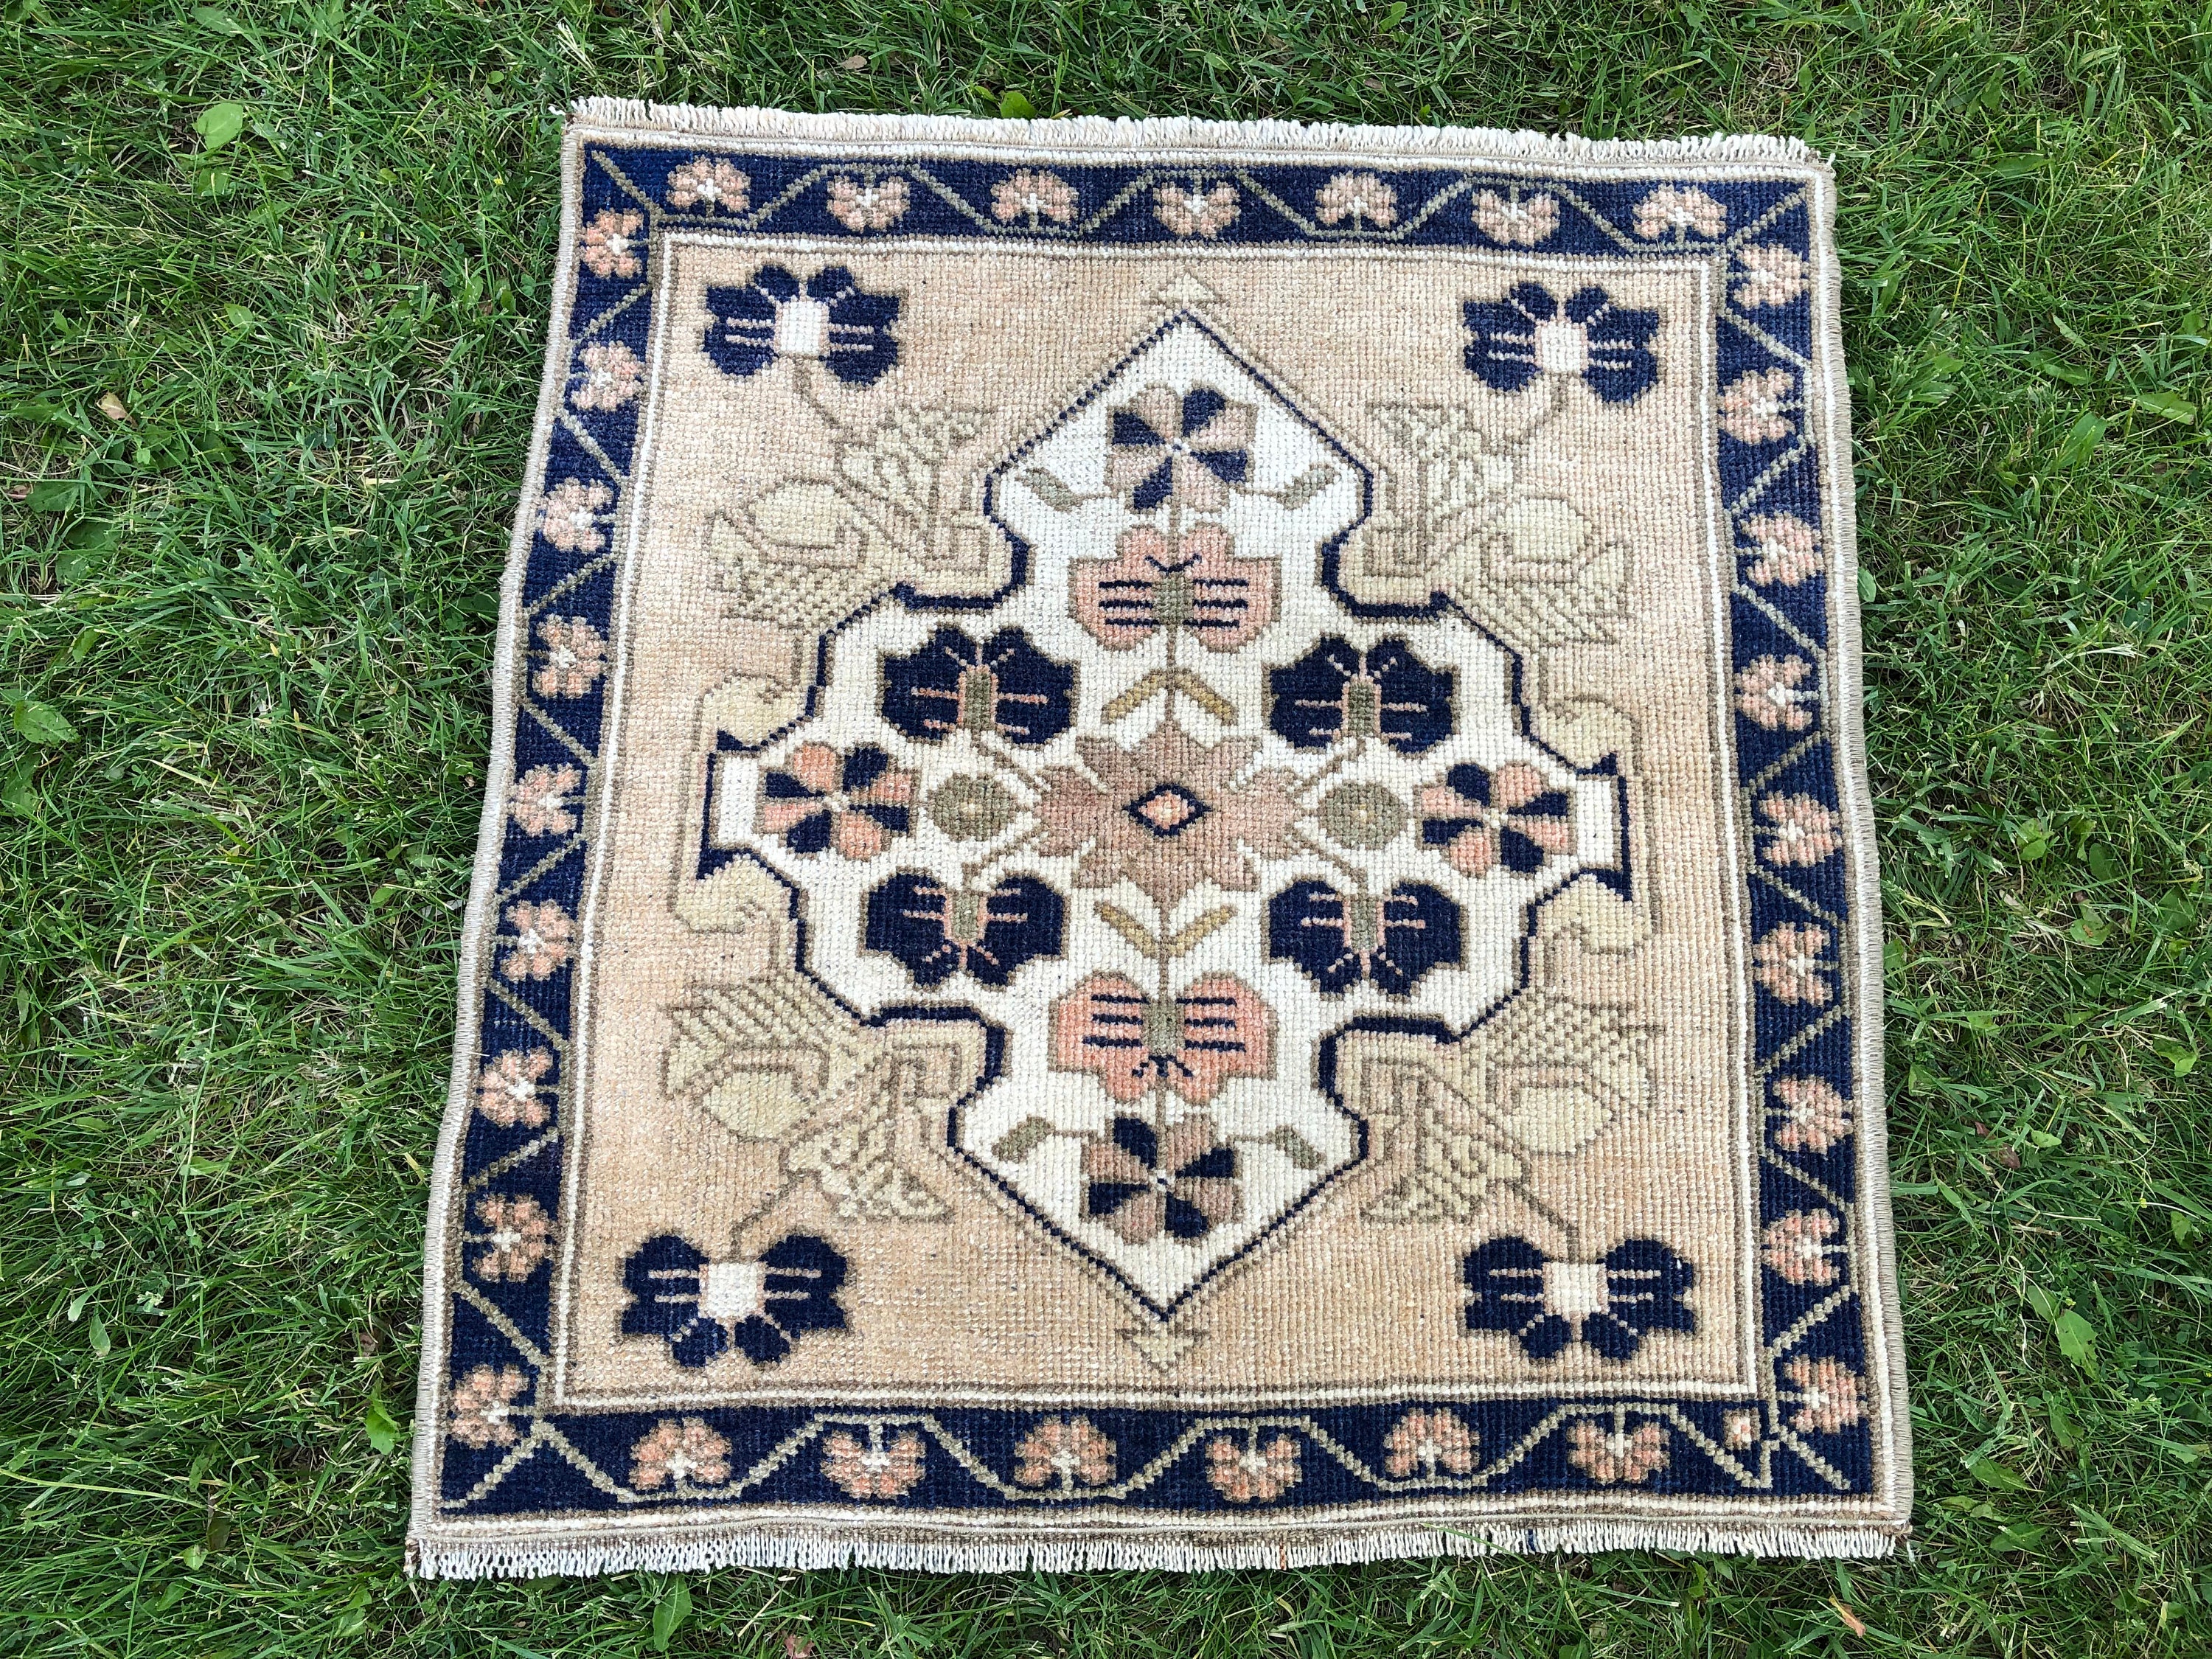 Turkish Square Door Mat, Neutral Vintage Area Rug, Small Oushak Rug, 2x2 Rug  Square, Blue Kitchen Rug, Entry Rug, Outdoor Patio Rug 2'2x2'2 